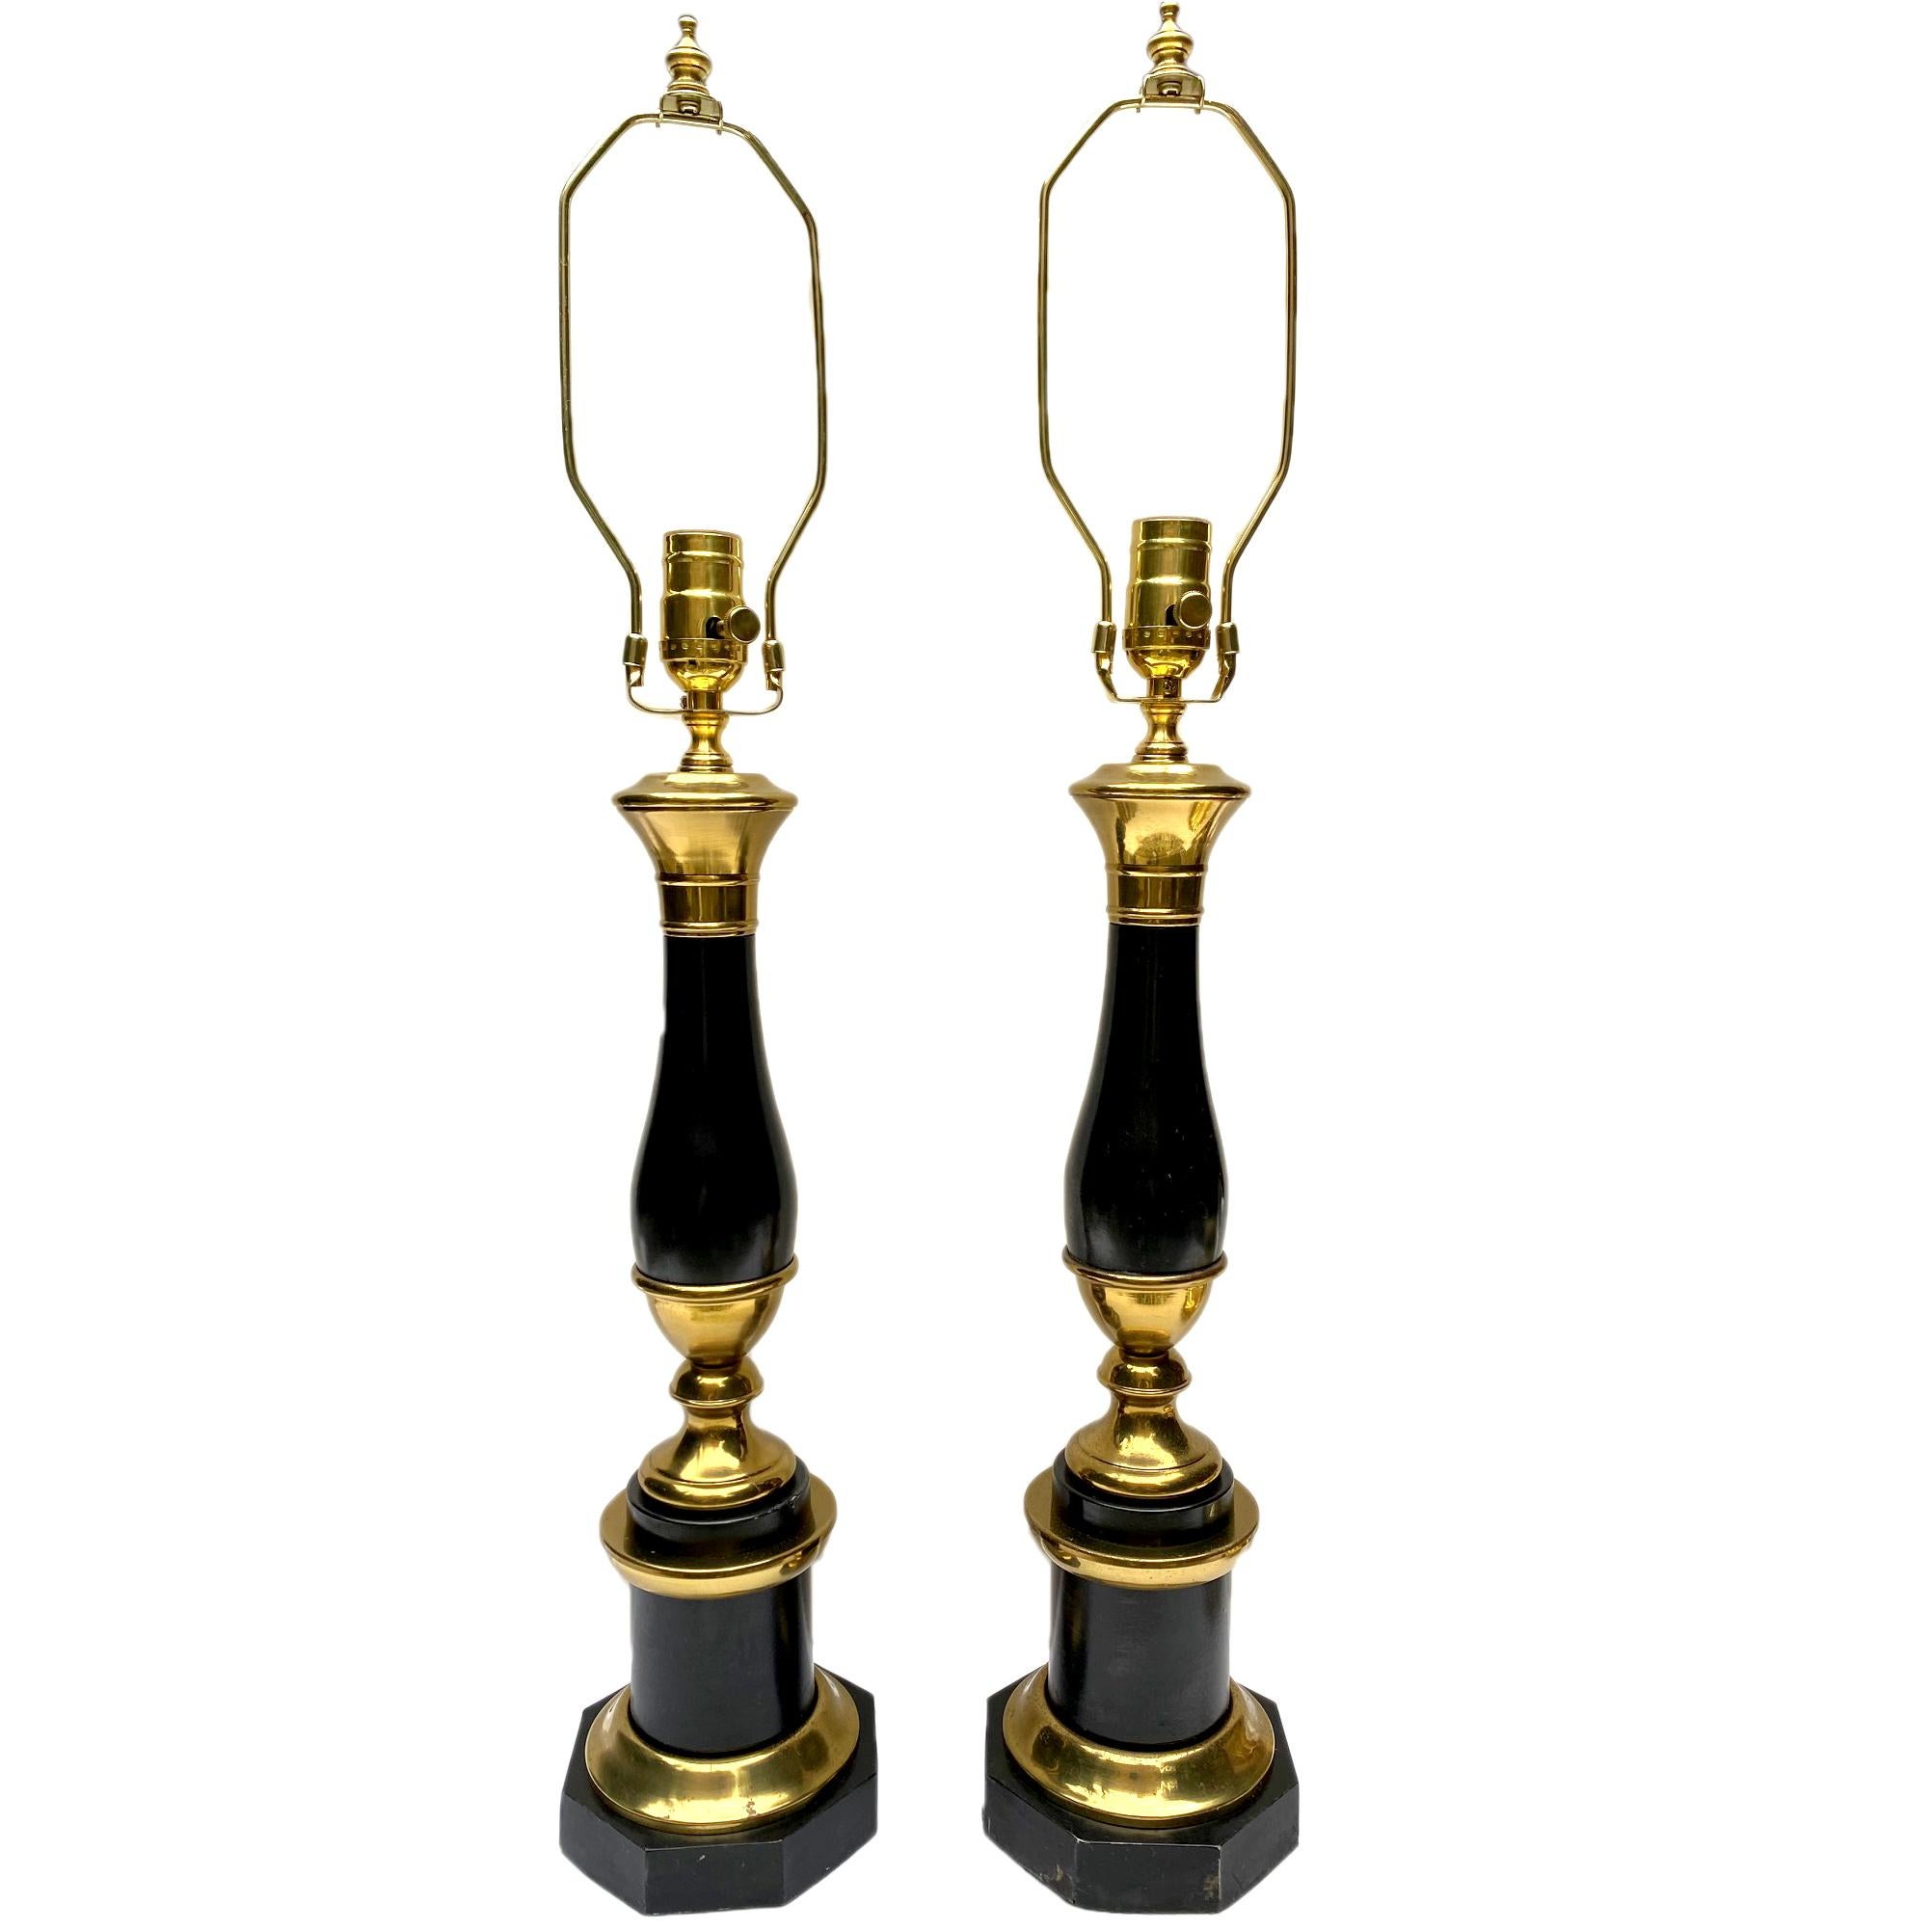 A pair of circa 1940's French painted and gilt table lamps with original patina.

Measurements:
Height of body: 17.5